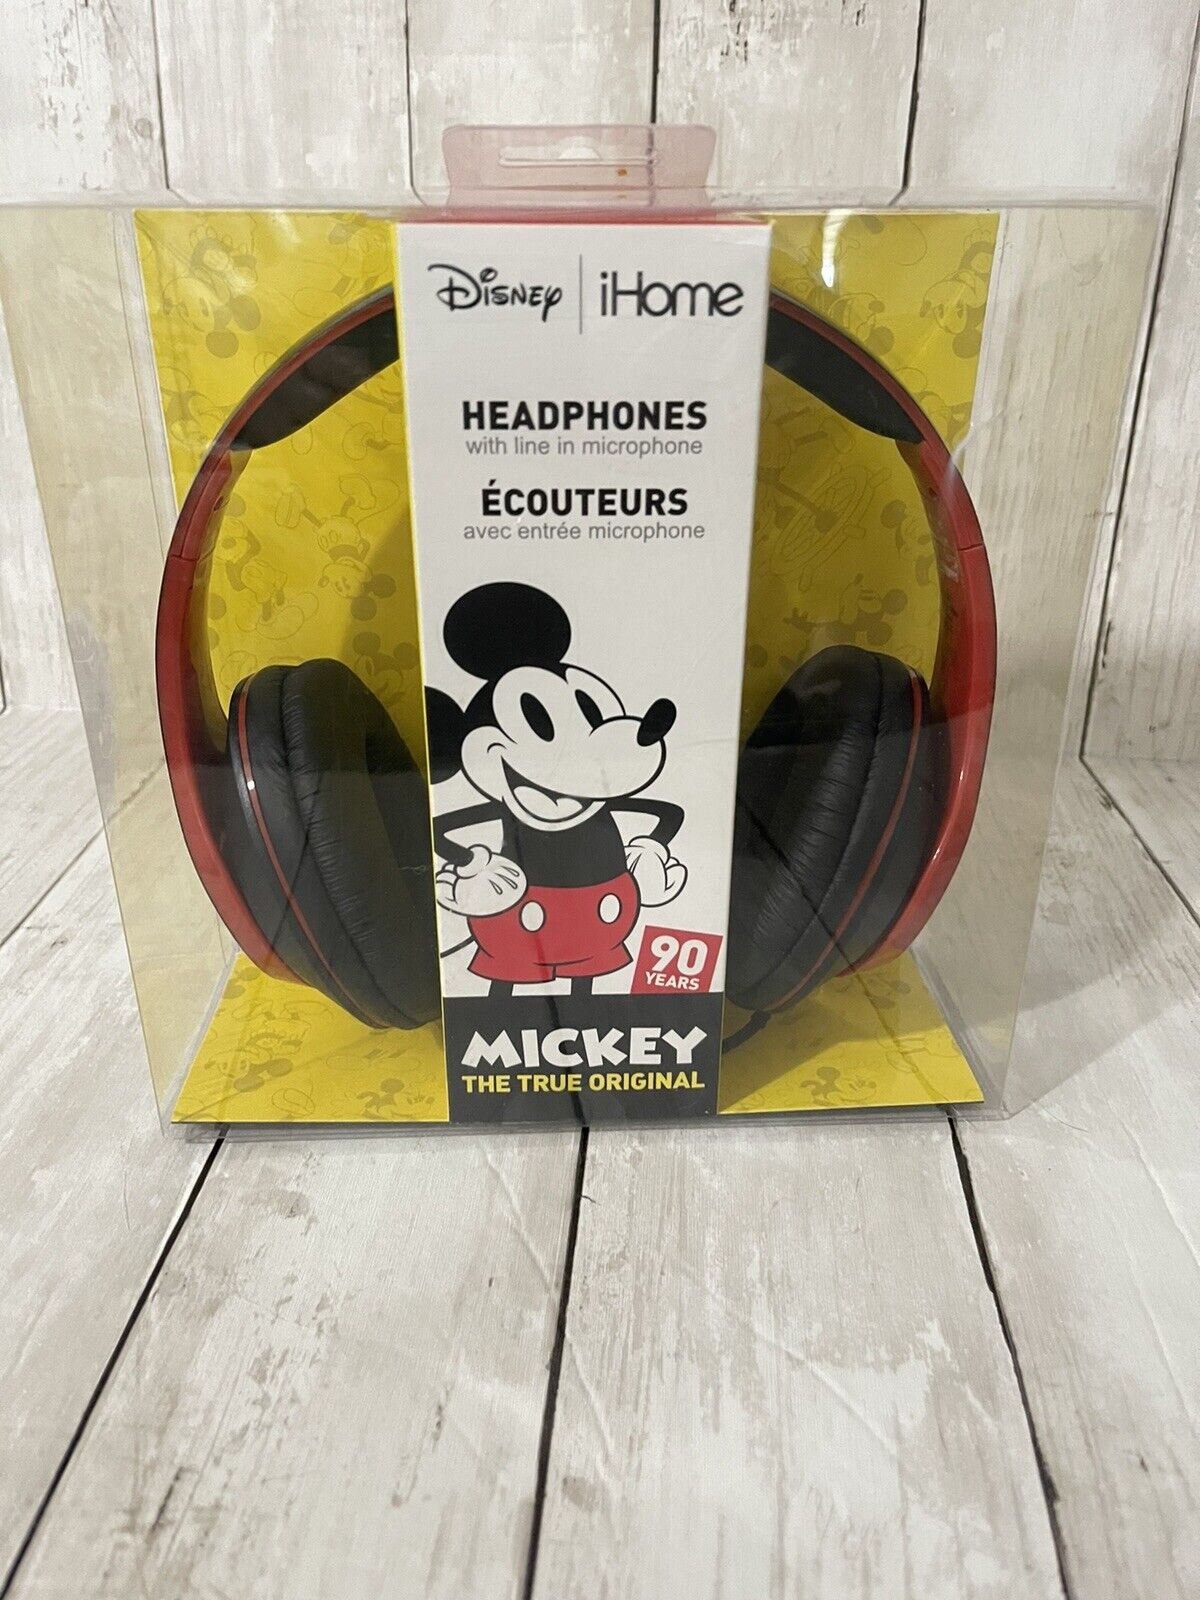 iHome Disney Mickey the True Original Headphones with Built in Microphone wired